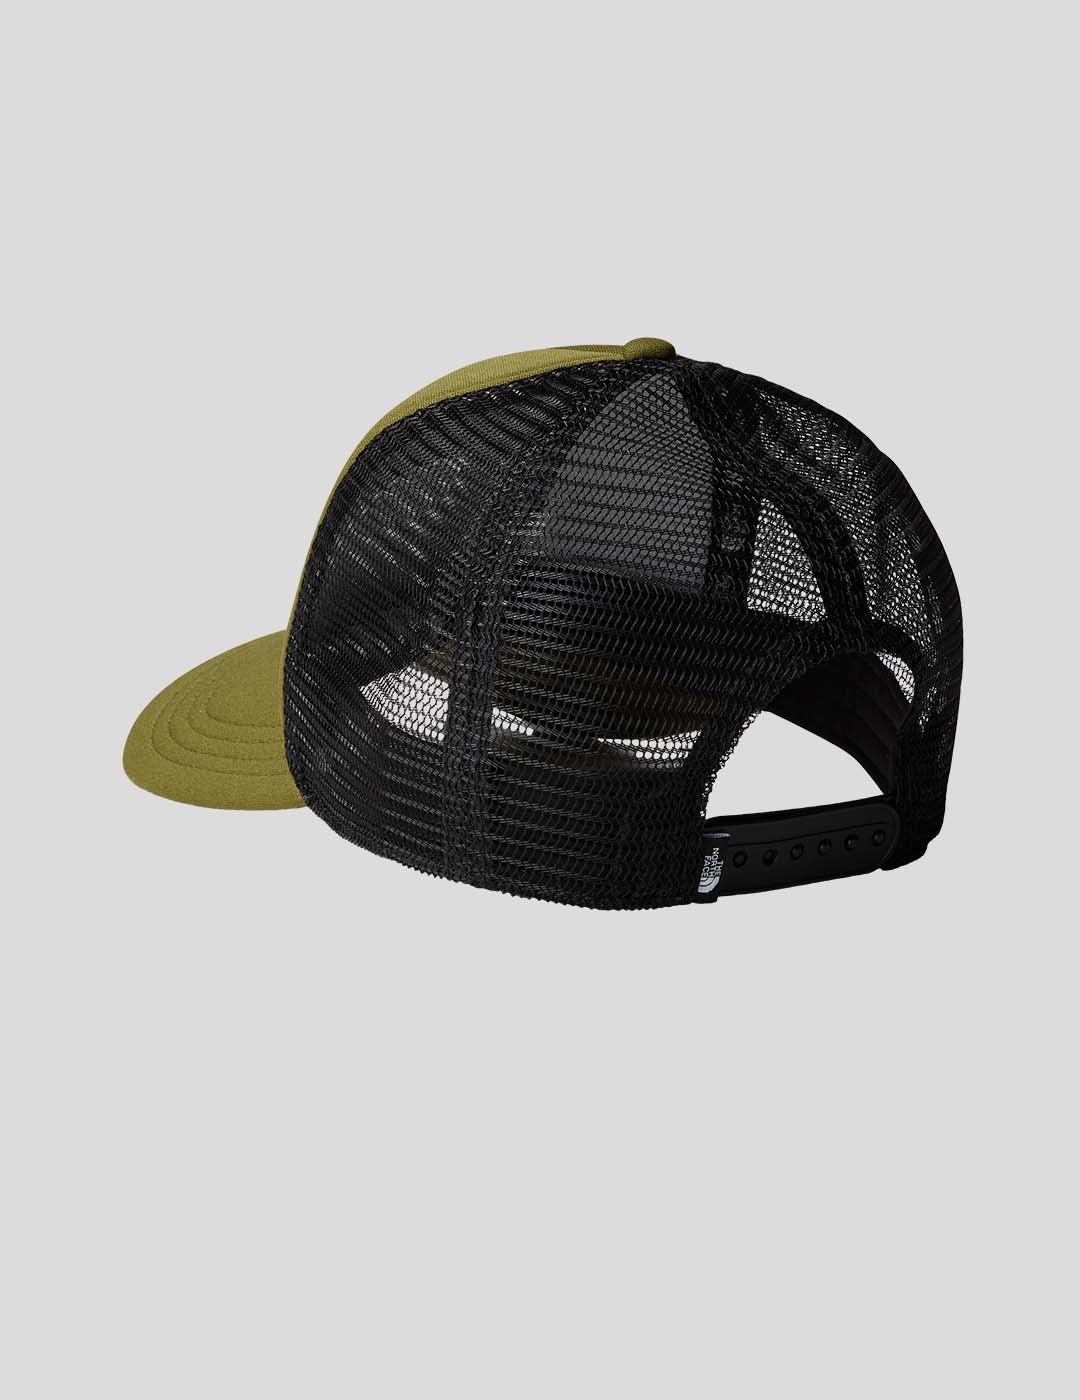 GORRA THE NORTH FACE TNF LOGO TRUCKER  FOREST OLIVE 